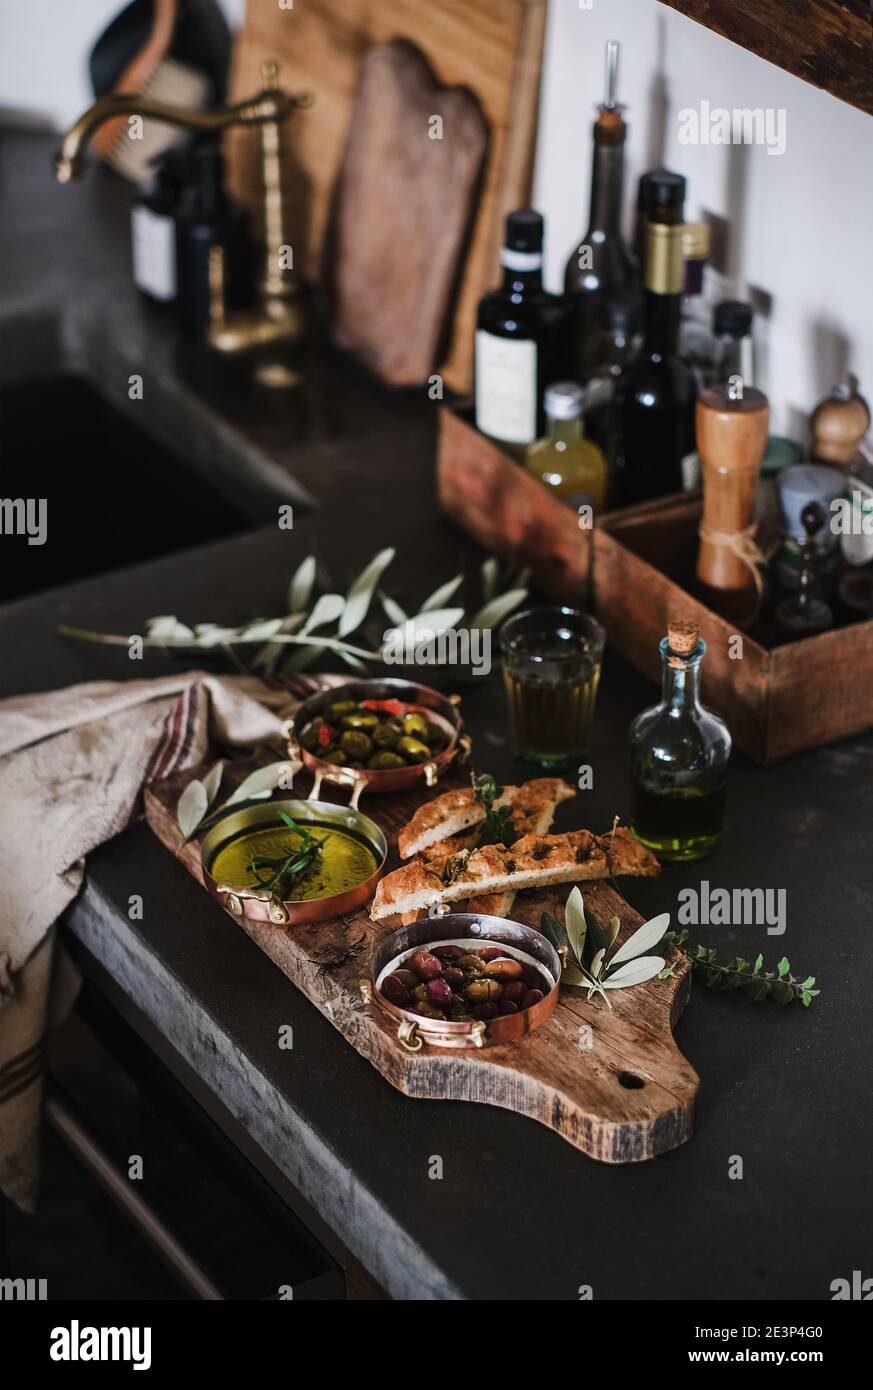 Pickled Greek olives, olive oil in copper jars and herbed focaccia slices on rustic wooden board over kitchen counter. Traditional Mediterranean meze appetizers platter Stock Photo